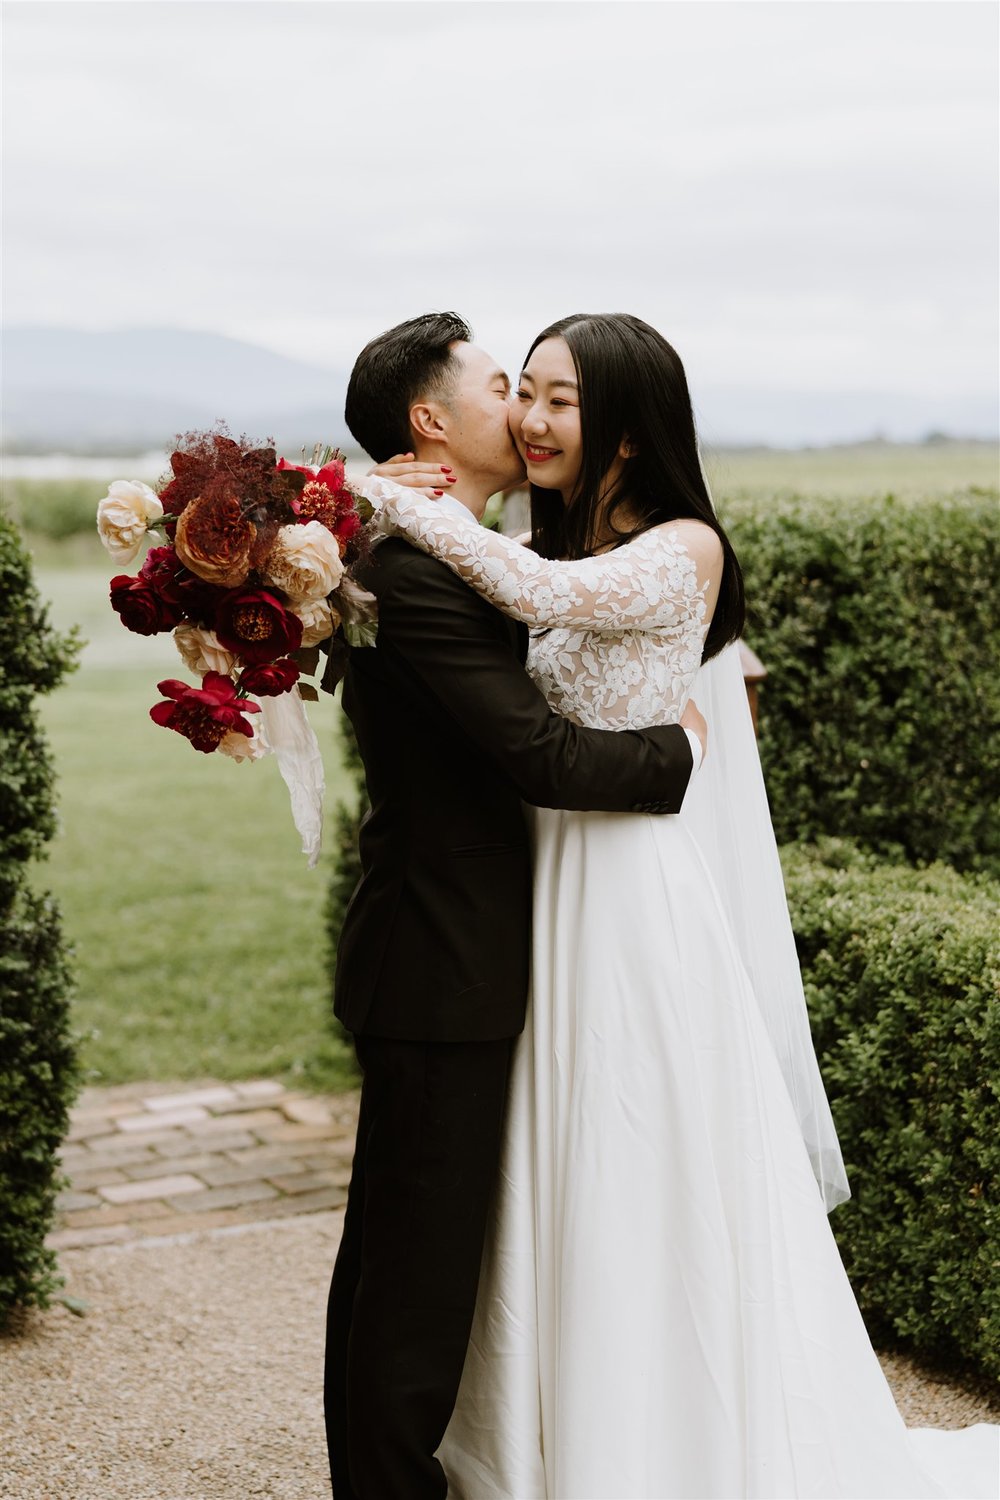 Stones of the Yarra Valley | Ceremony Flowers